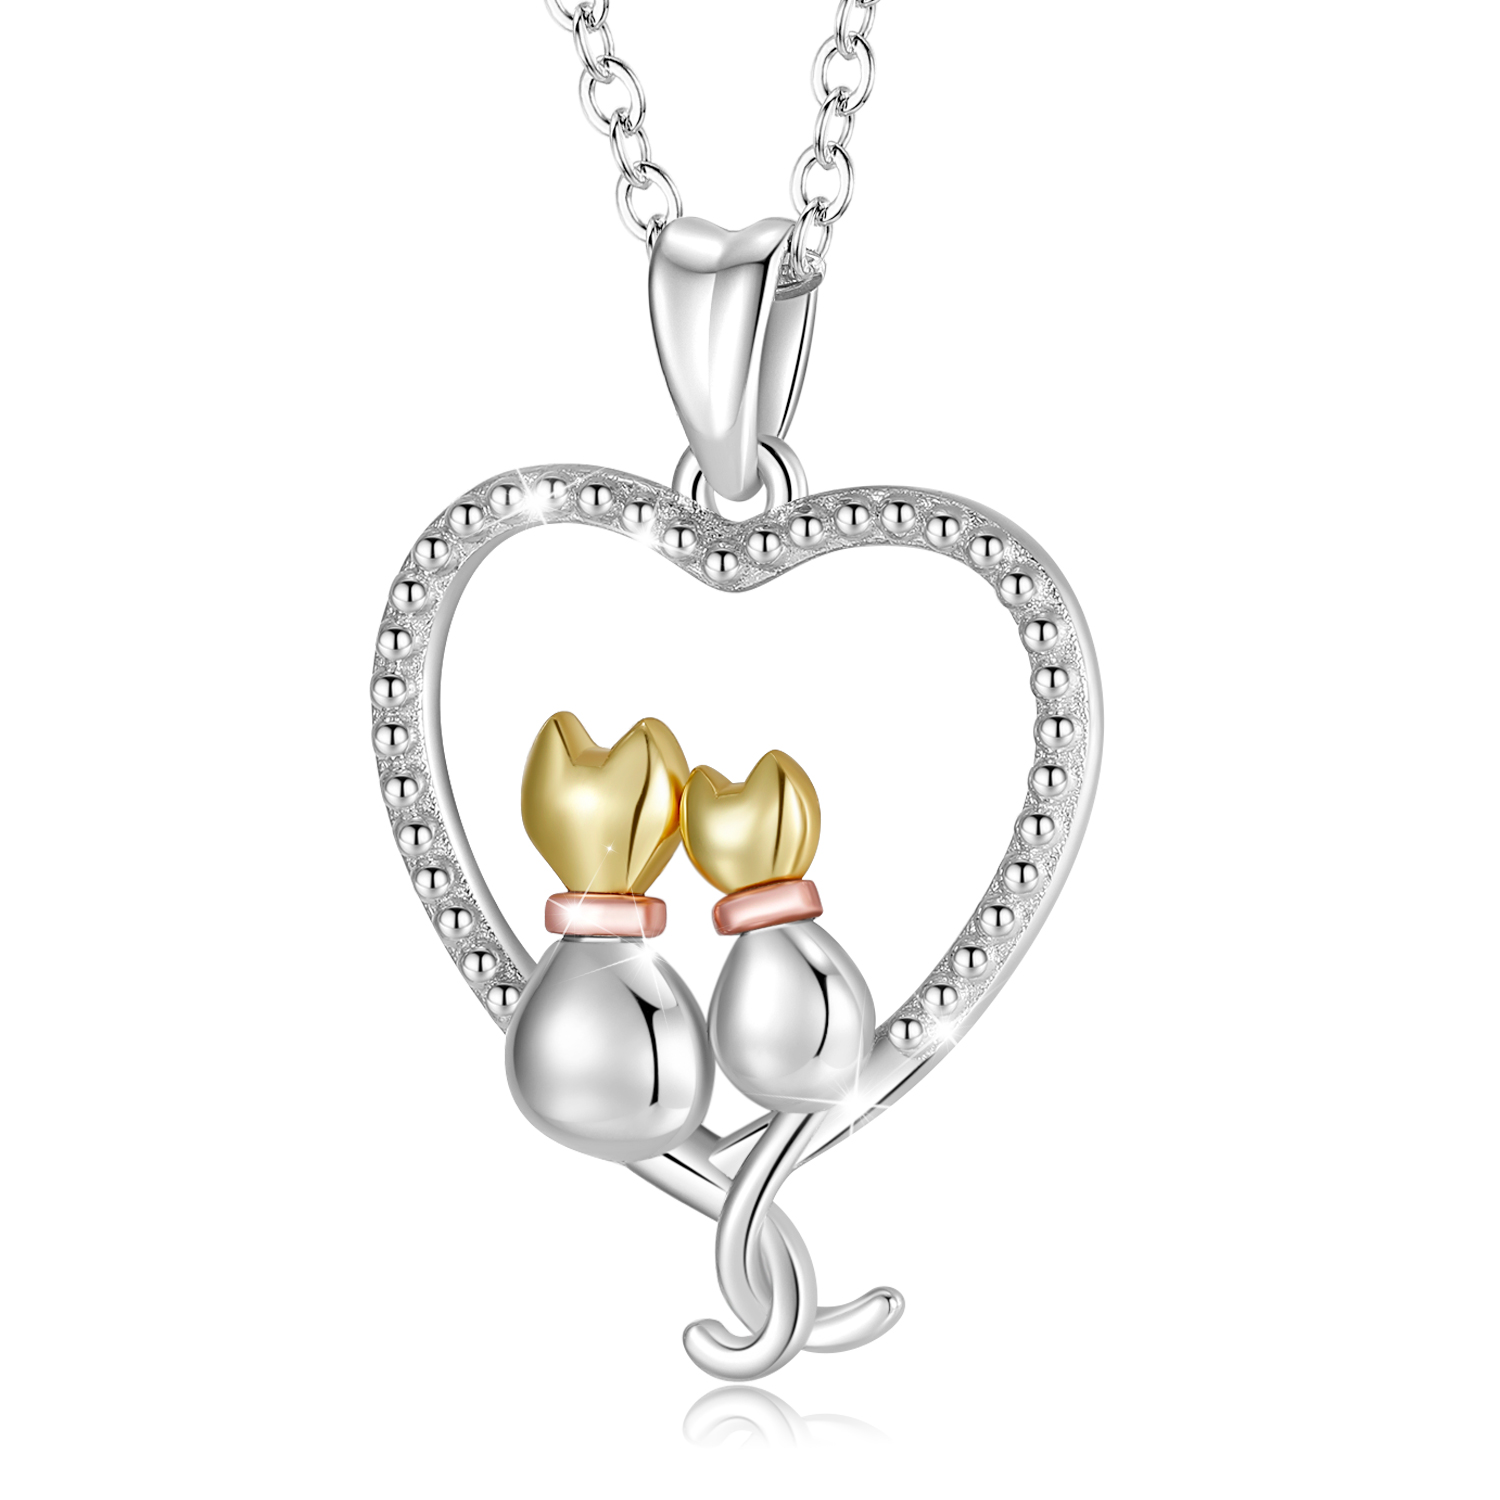 Merryshine Jewelry S925 Sterling Silver Plating Gold Two Cat Necklace for Women and Girls